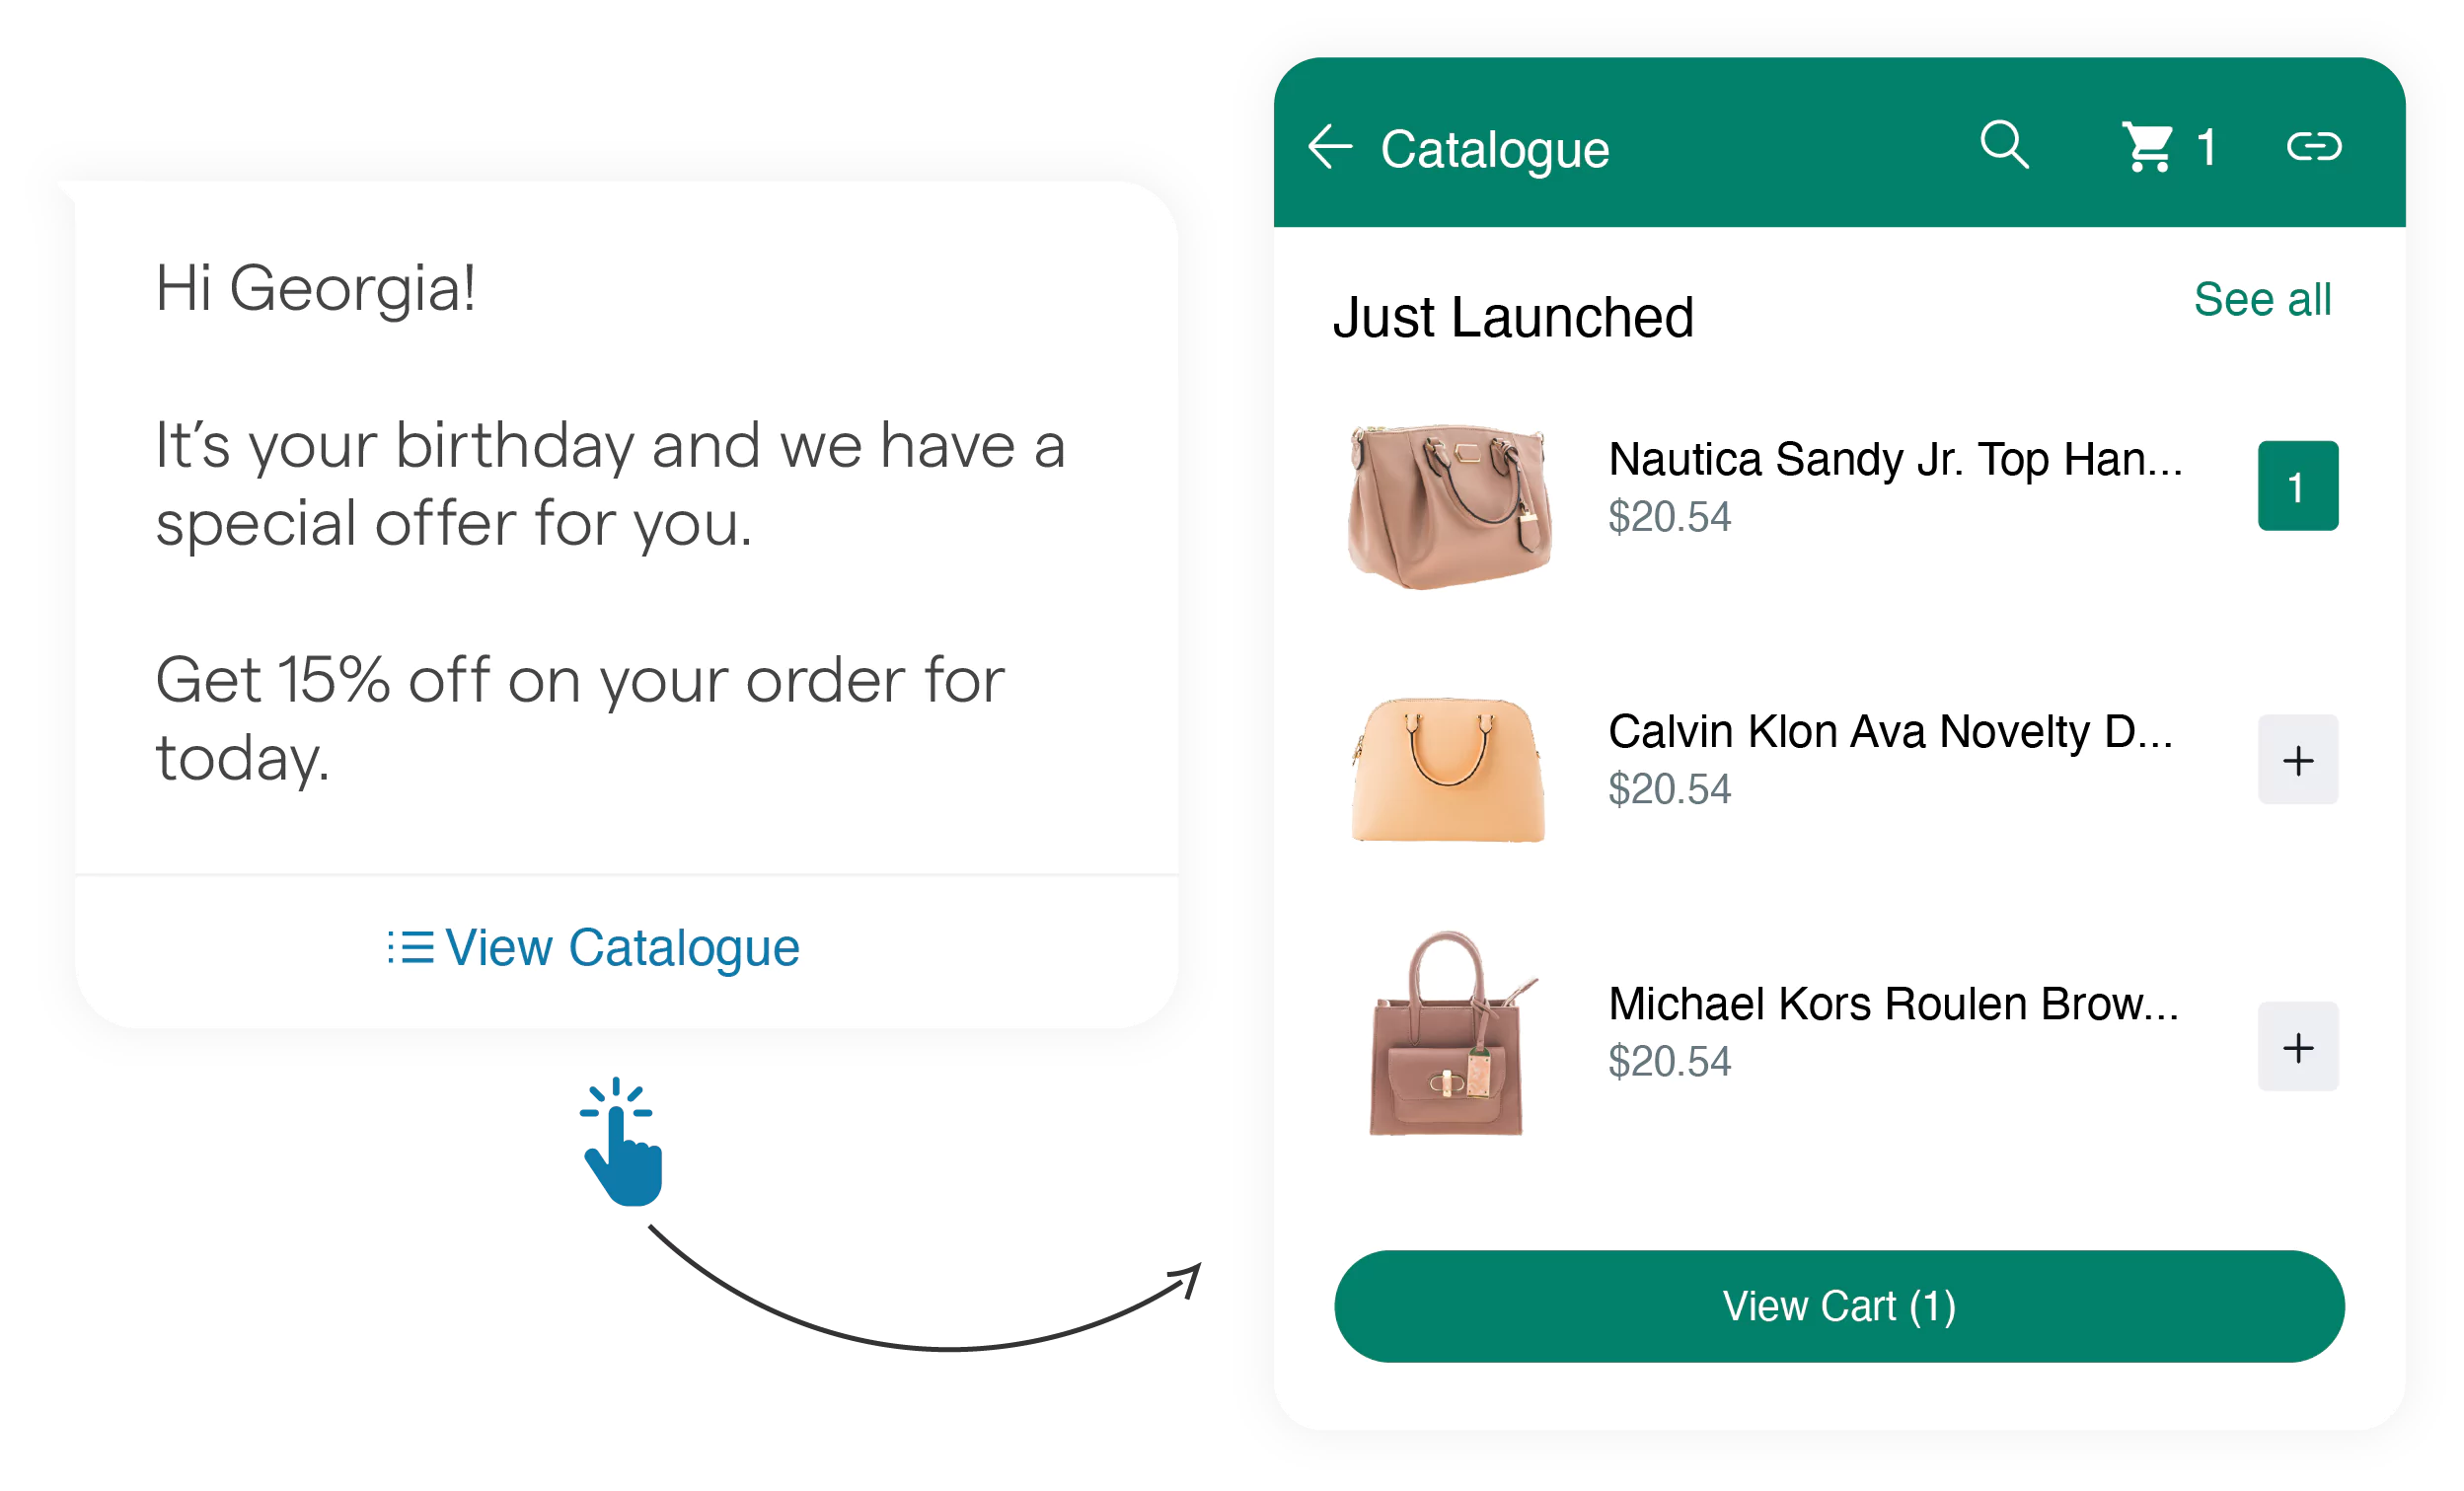 Features of WhatsApp Chatbot